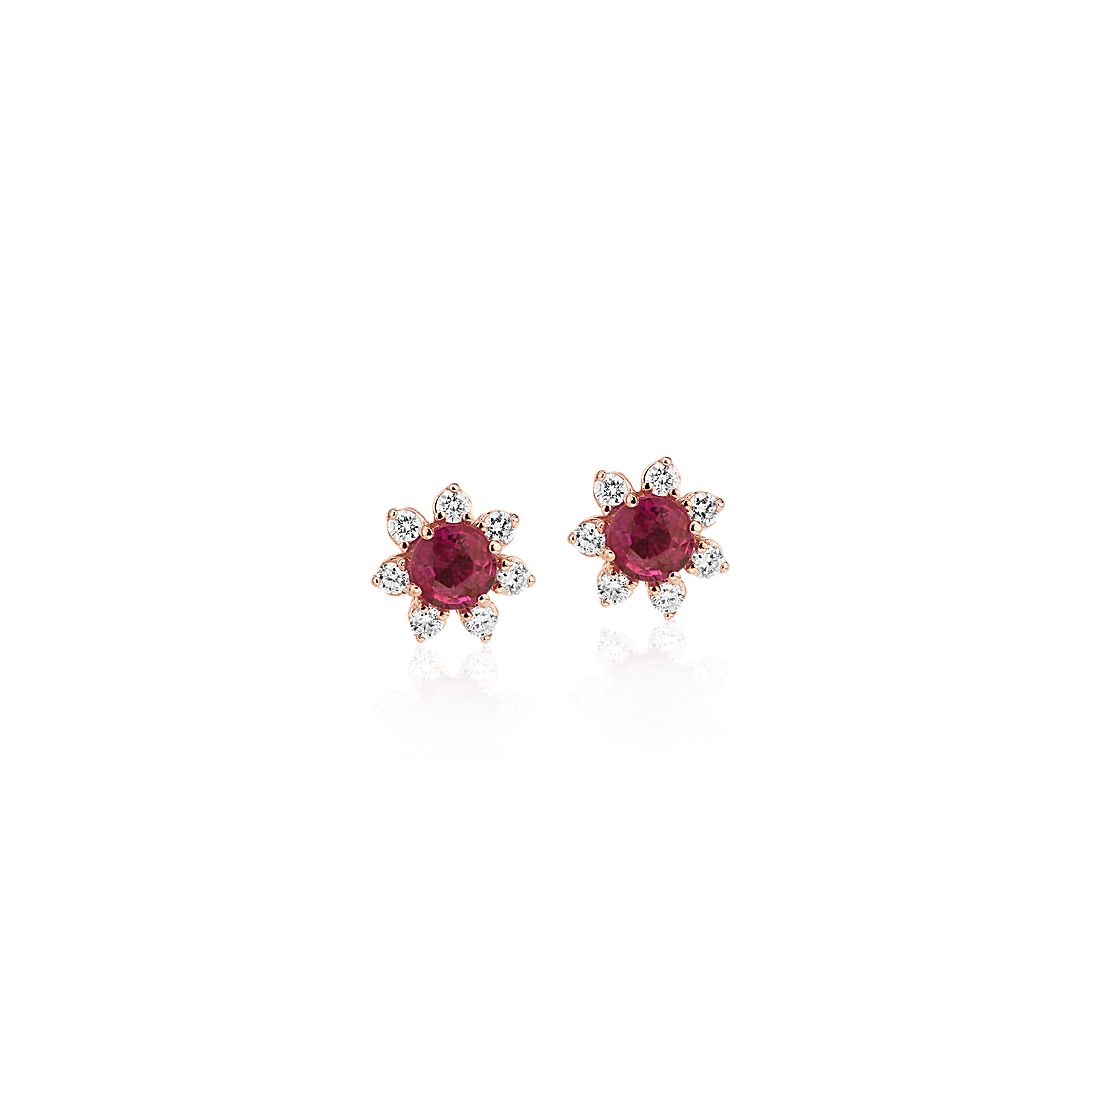 Details about   1CT Round Red Ruby CZ Halo Star Earrings Women Jewelry Gift 14K Rose Gold Plated